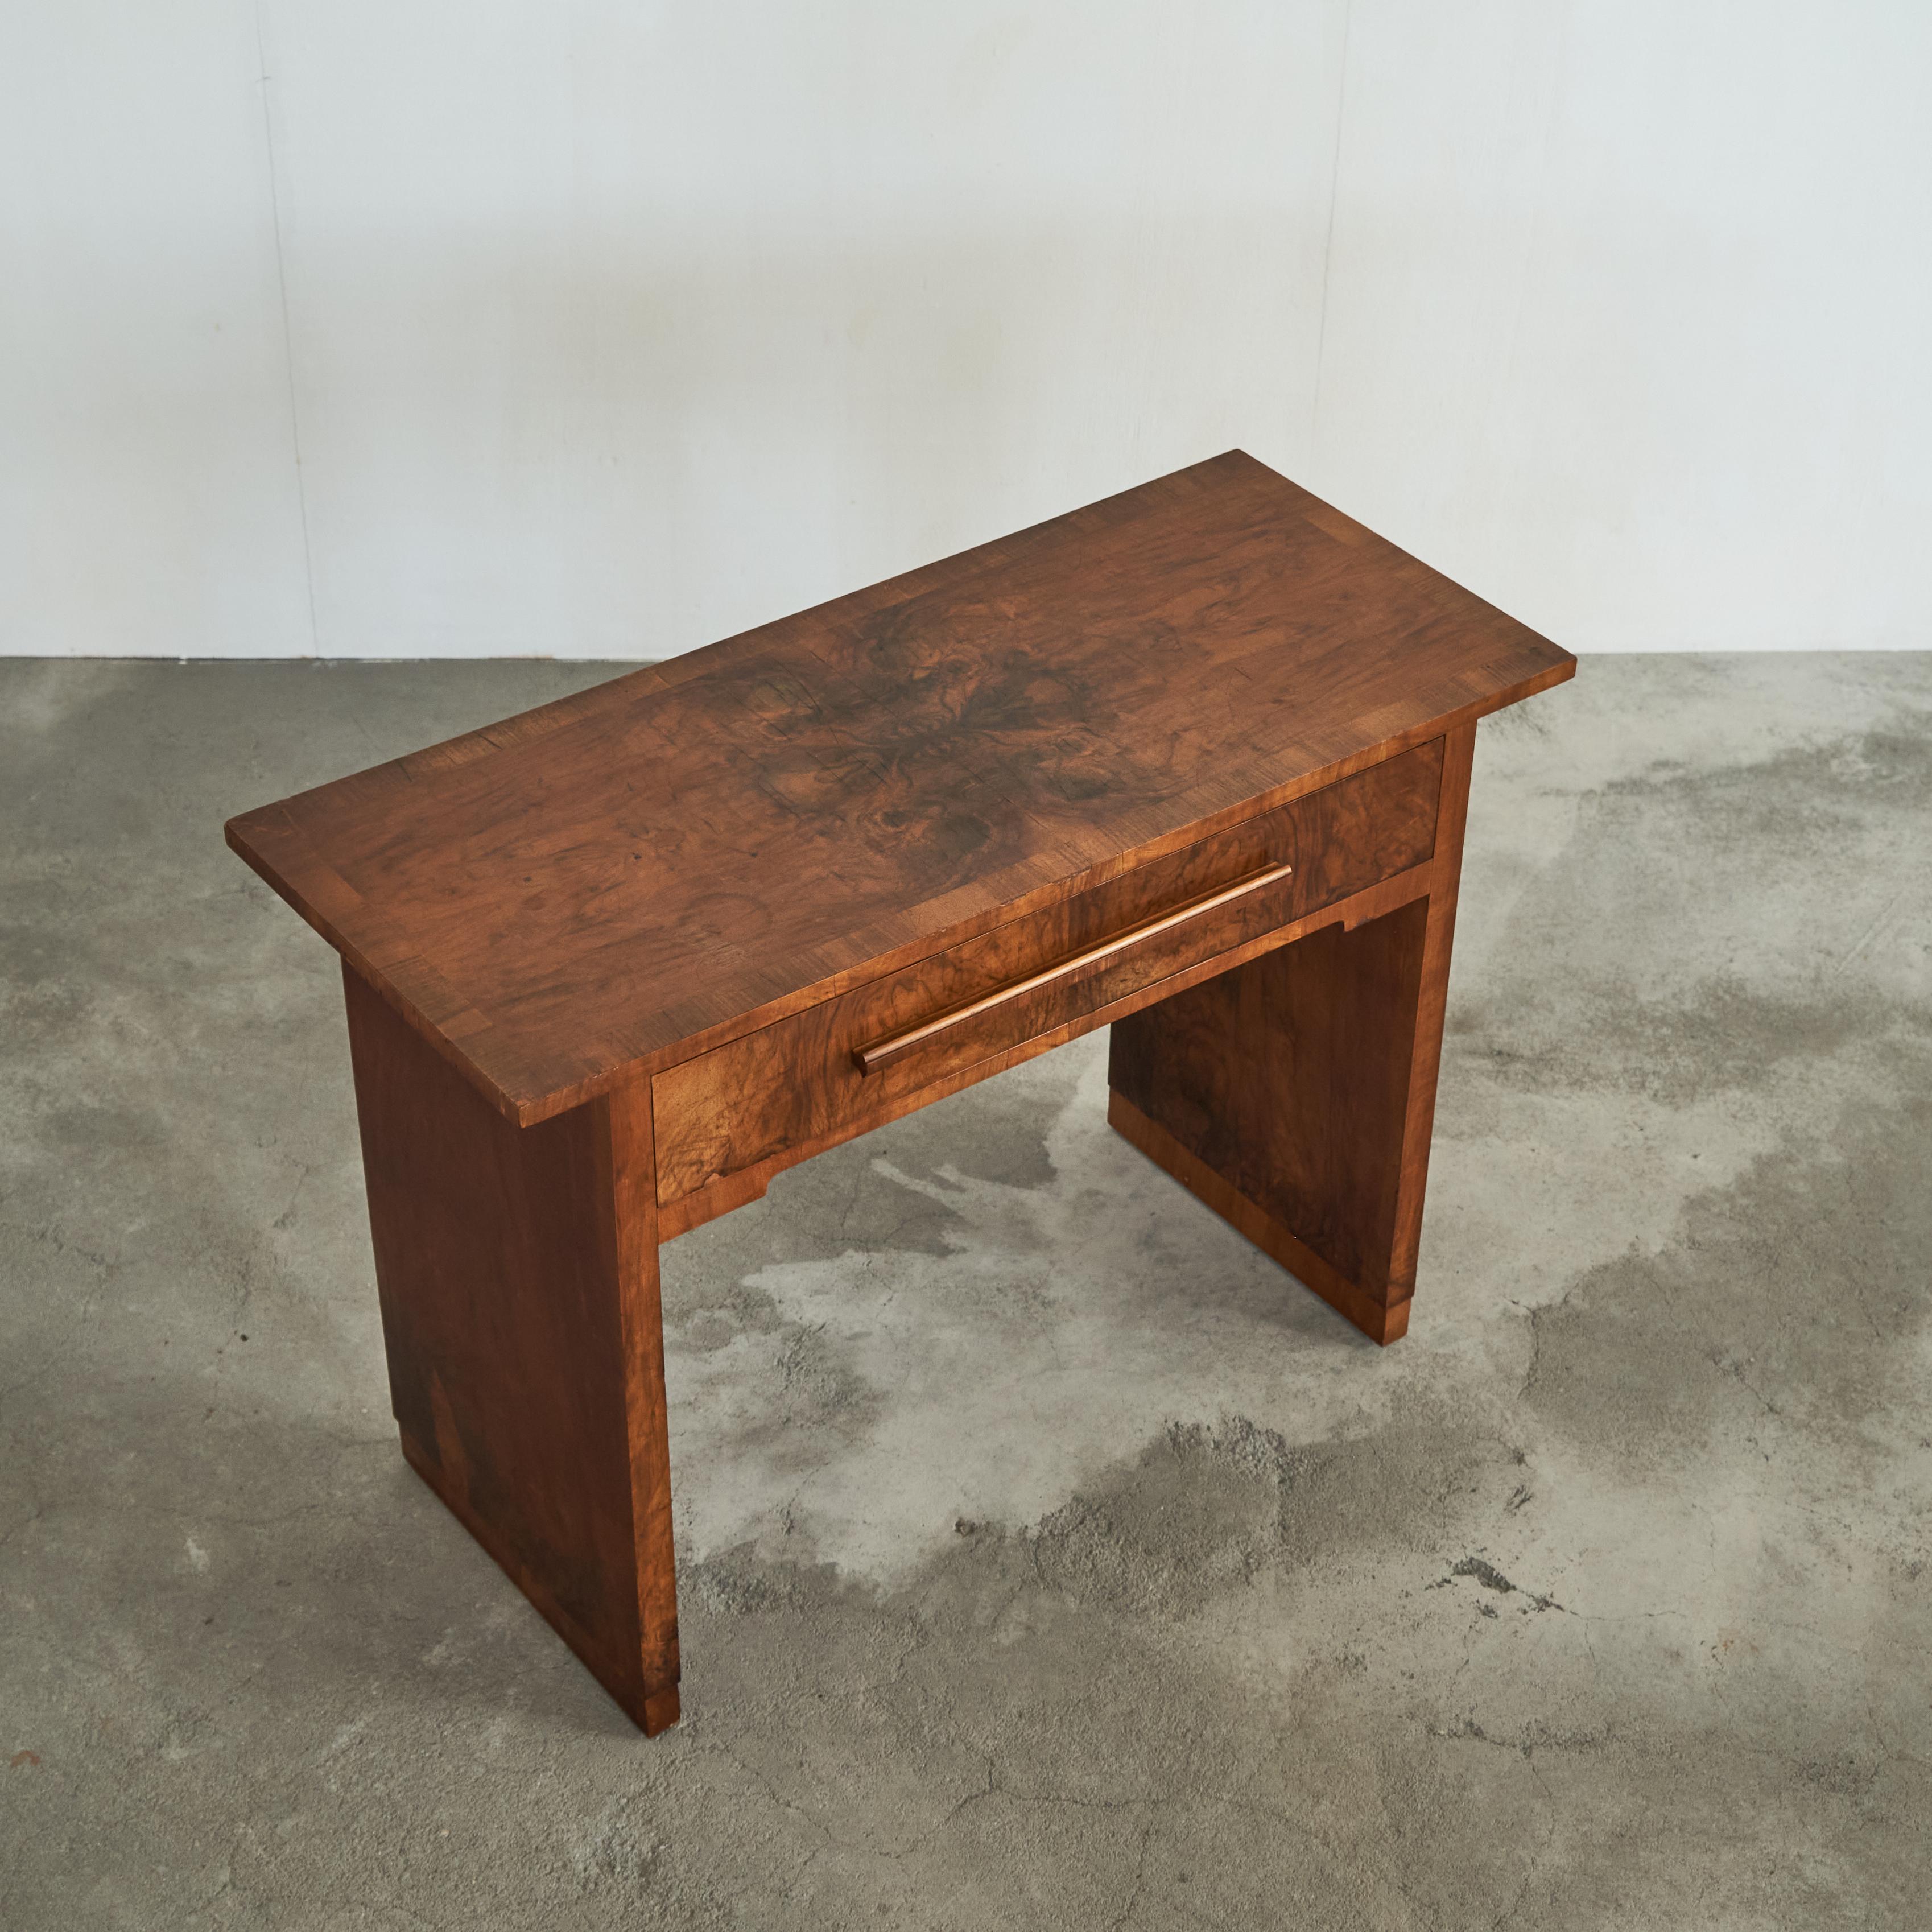 Stunning Art Deco Writing Desk in Book Matched Burl Veneer, Europe, 1930s.

This is a wonderful and very stylish art deco desk or writing table in beautiful book matched burl veneer. Great colors and wood grain, beautifully book matched. A true art